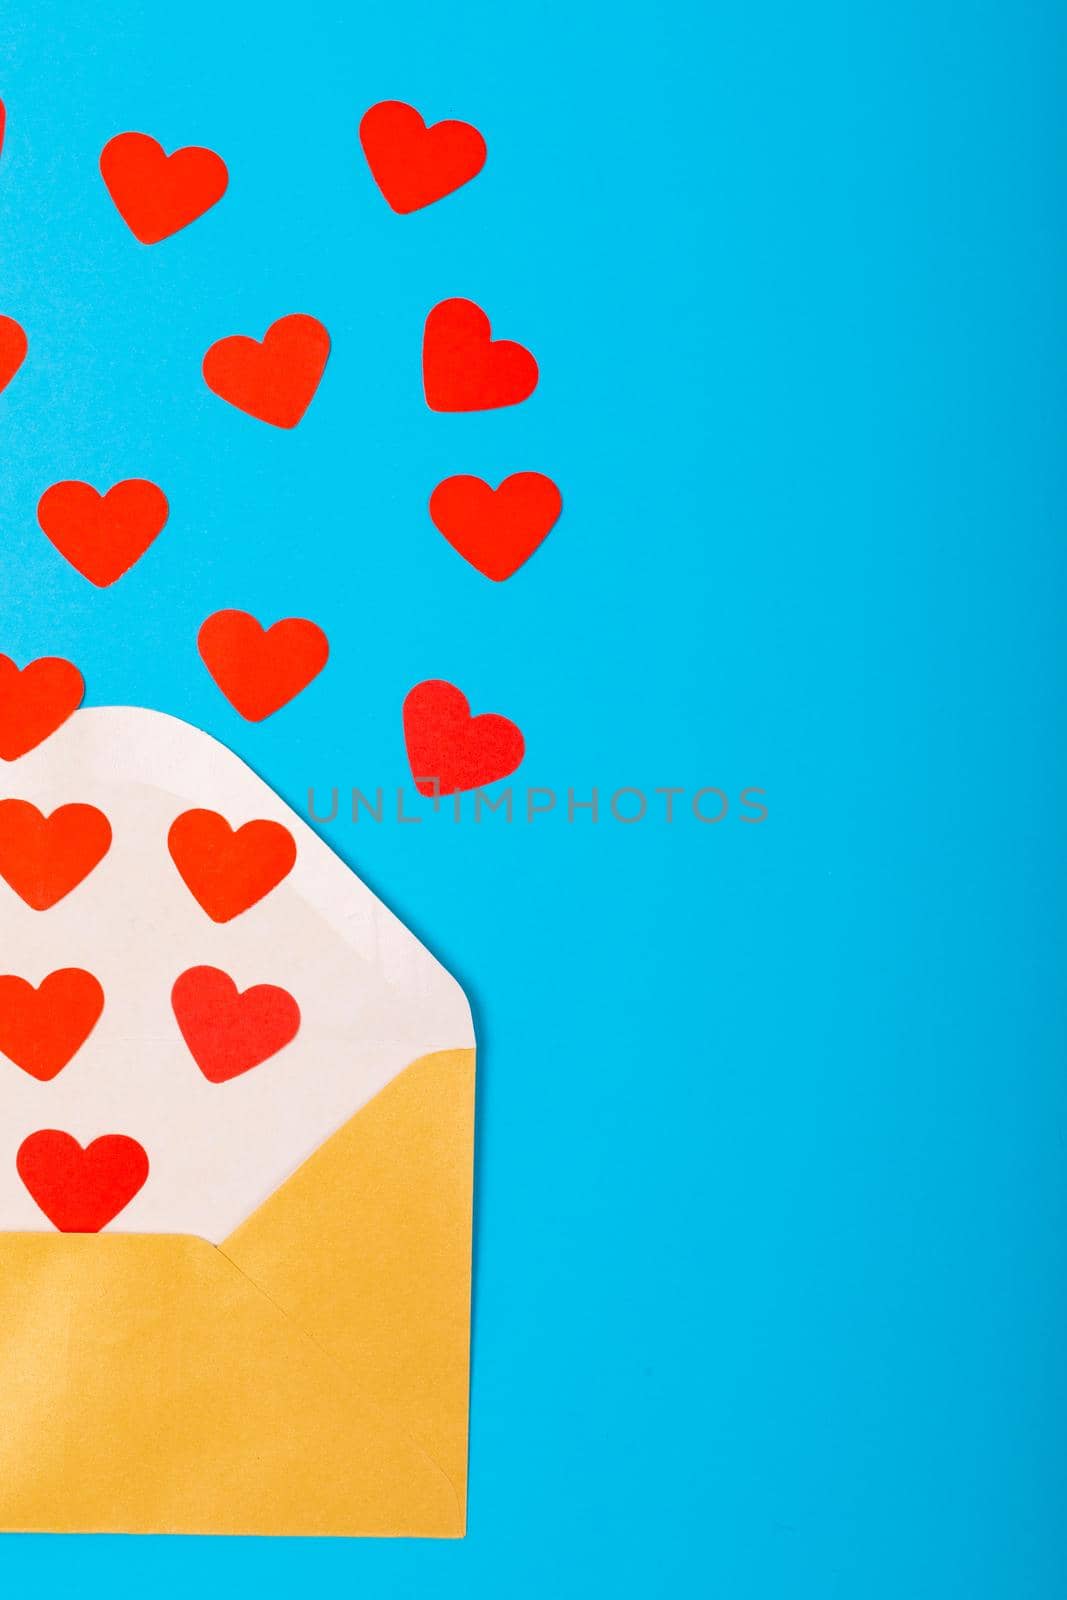 Overhead view of open beige envelope with red heart shapes by copy space on blue background by Wavebreakmedia